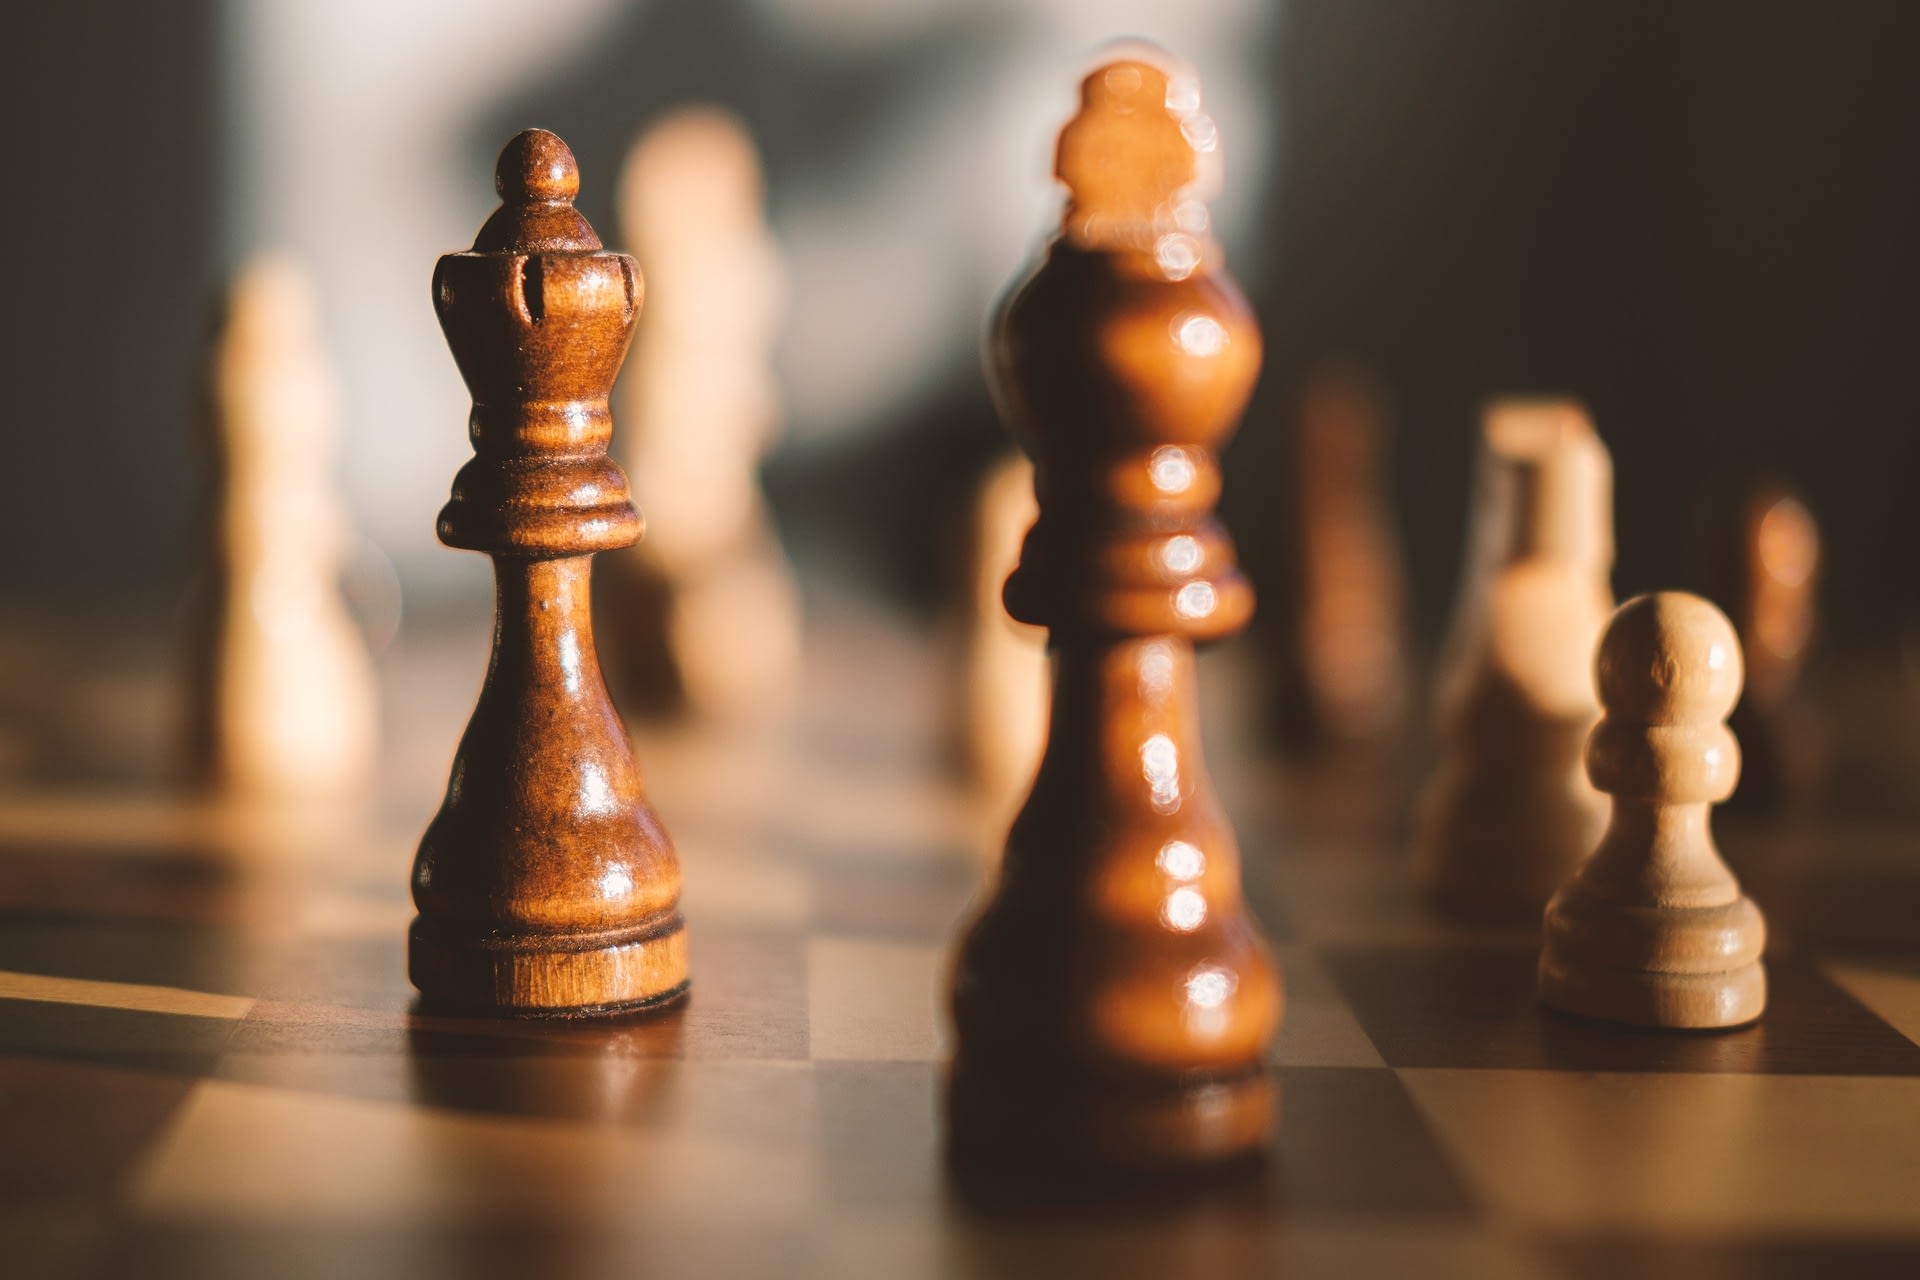 How to join FIDE and have a chess FIDE rating - Quora